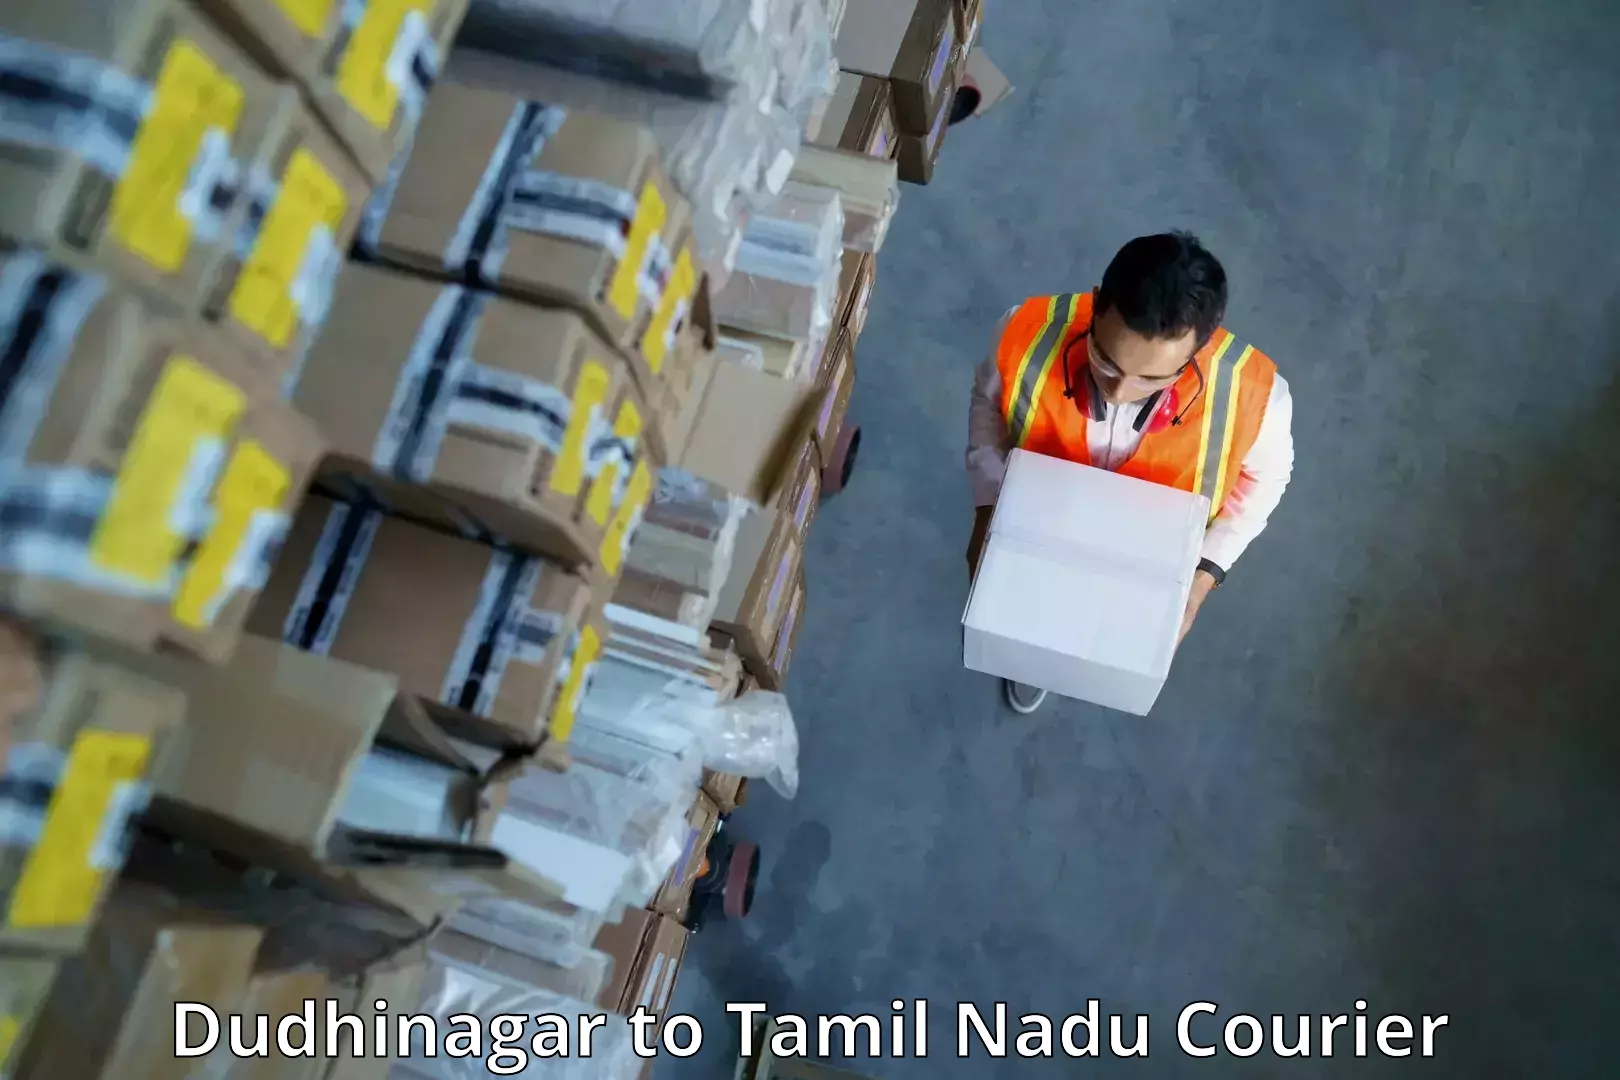 Courier service innovation Dudhinagar to Trichy